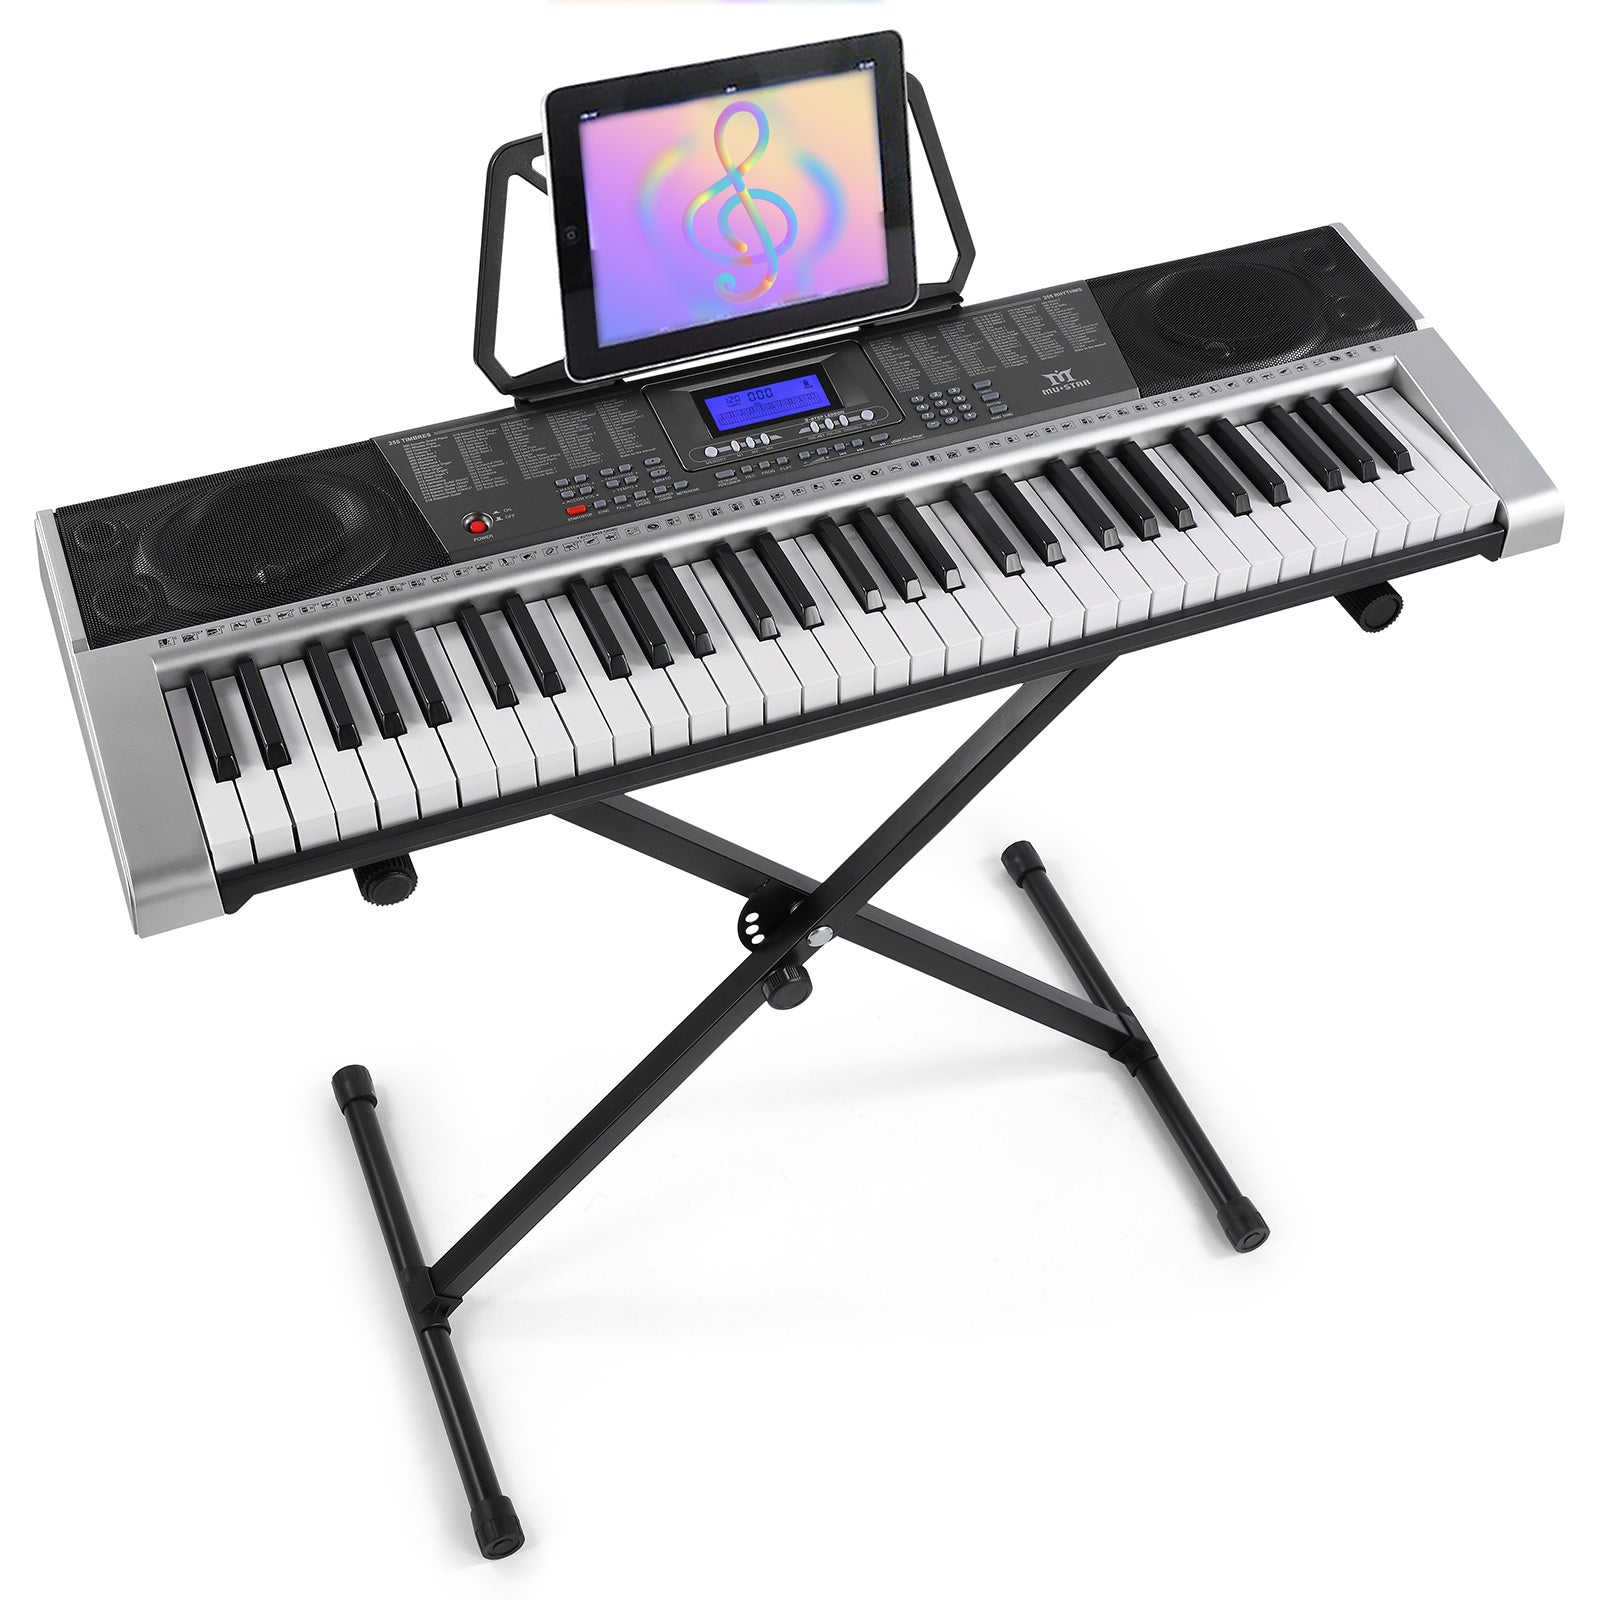 MUSTAR MEK-300, 61 Key Piano Keyboard, Electric Keyboard Piano with Stand for Beginners